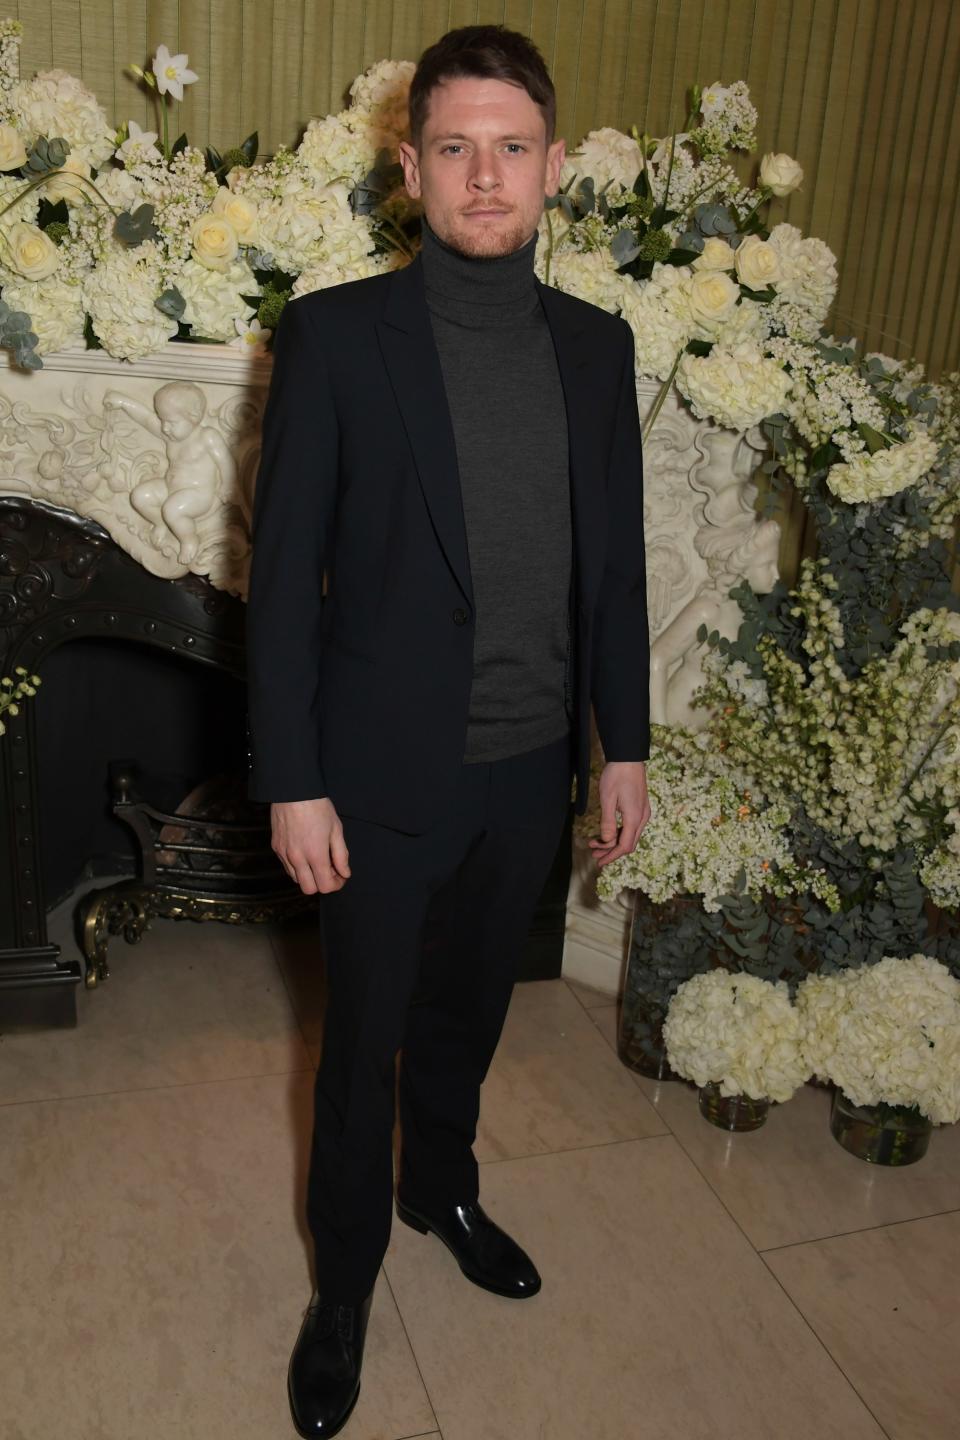 Jack O’Connell attends the British Vogue and Tiffany & Co. Celebrate Fashion and Film Party at Annabel’s